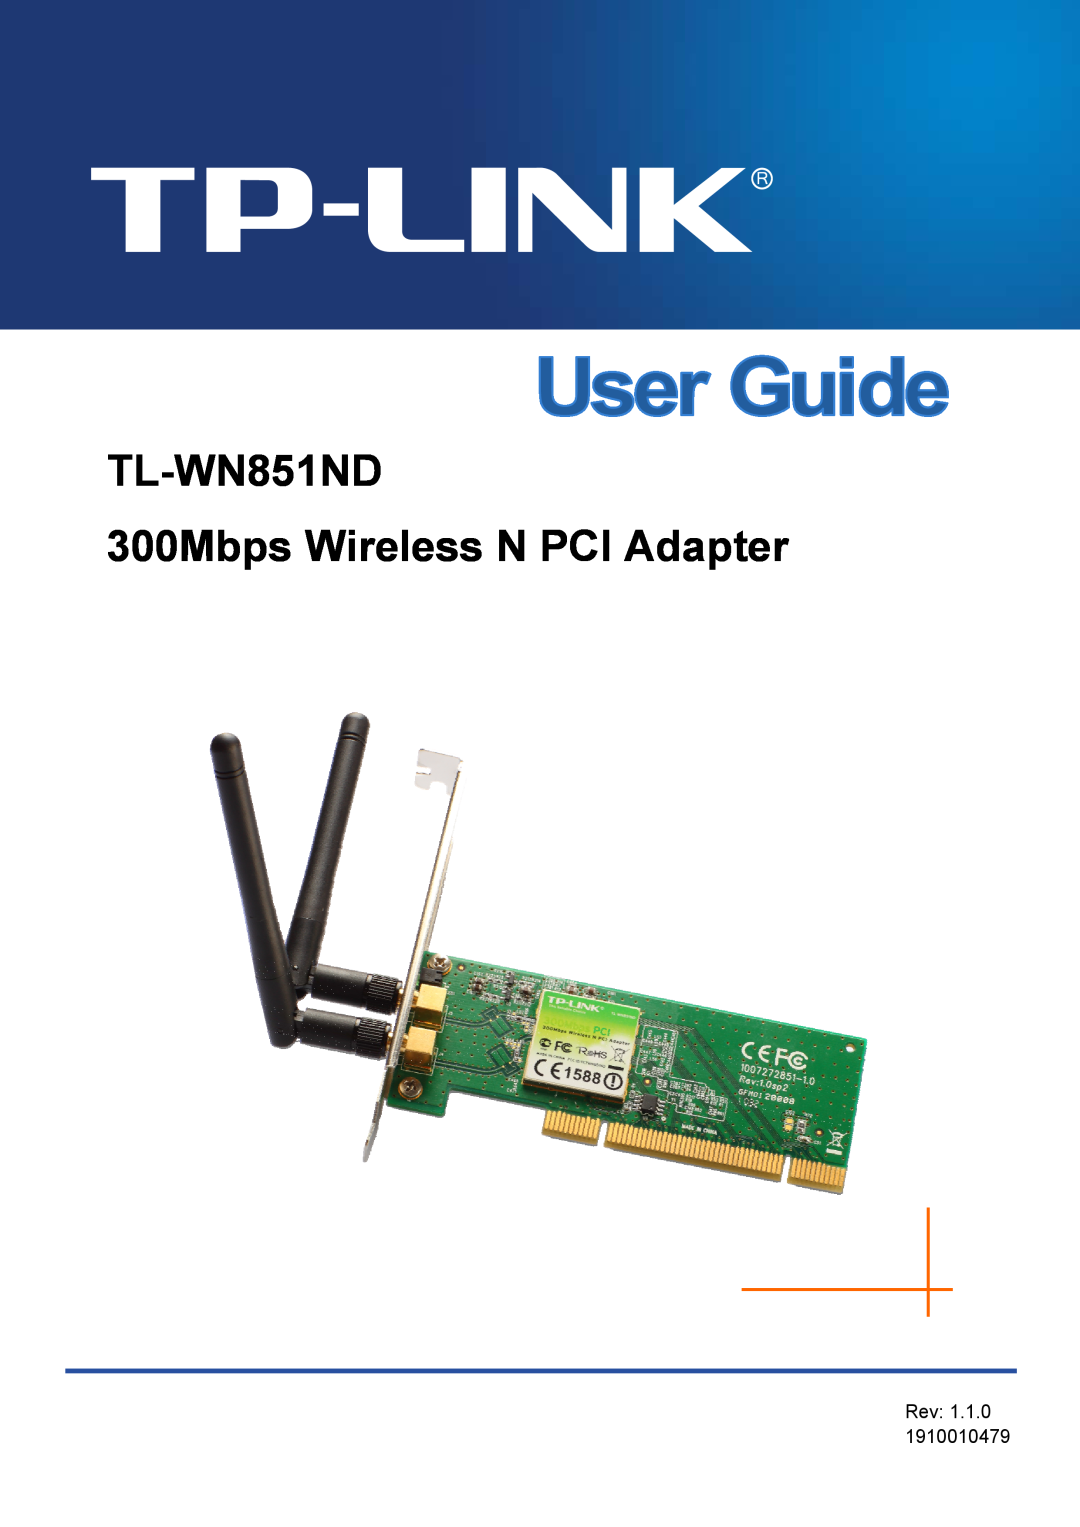 TP-Link manual TL-WN851ND 300Mbps Wireless N PCI Adapter, Rev 1.1.0 